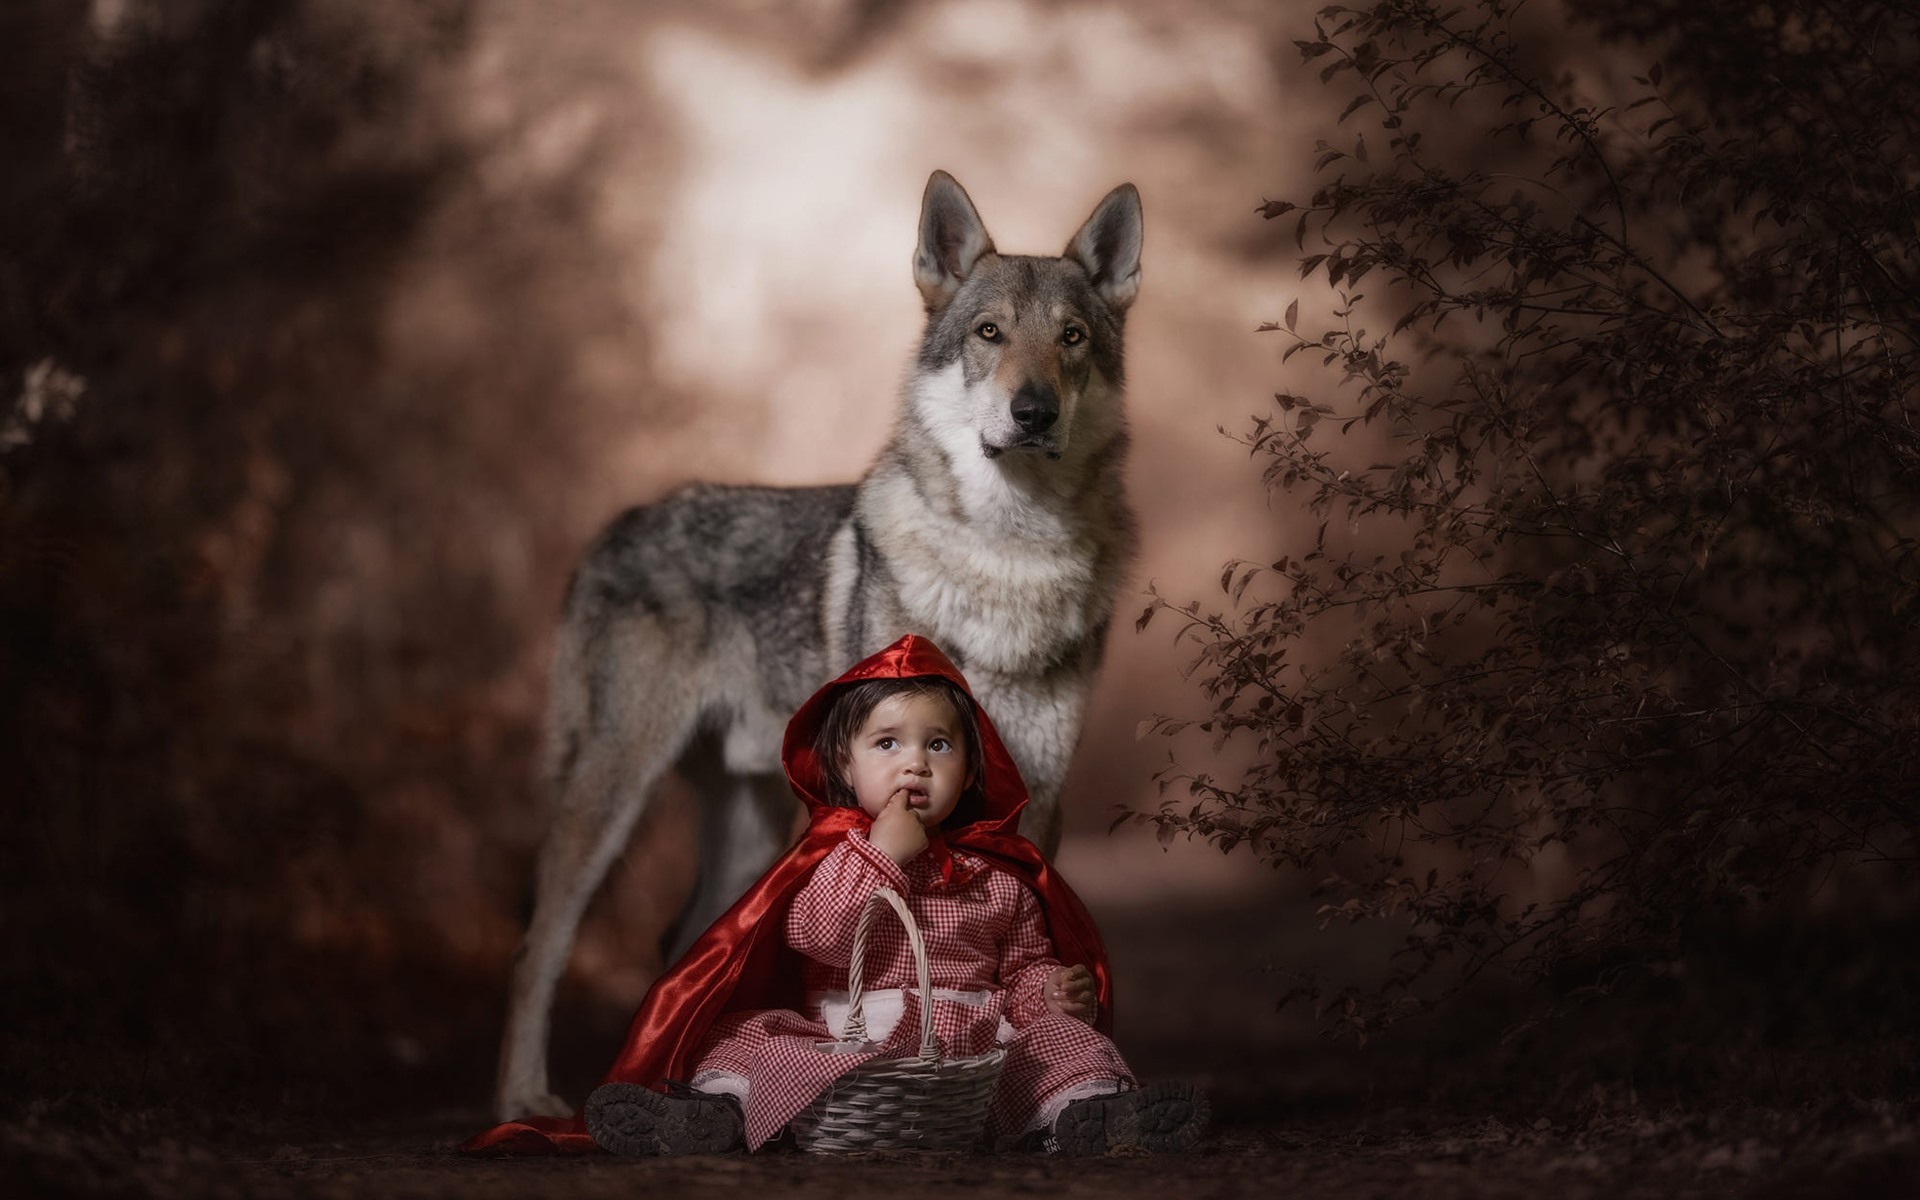 Wallpaper Red Hood, Child, Wolf - Red Hood Girl Wolf Forest Background - HD Wallpaper 